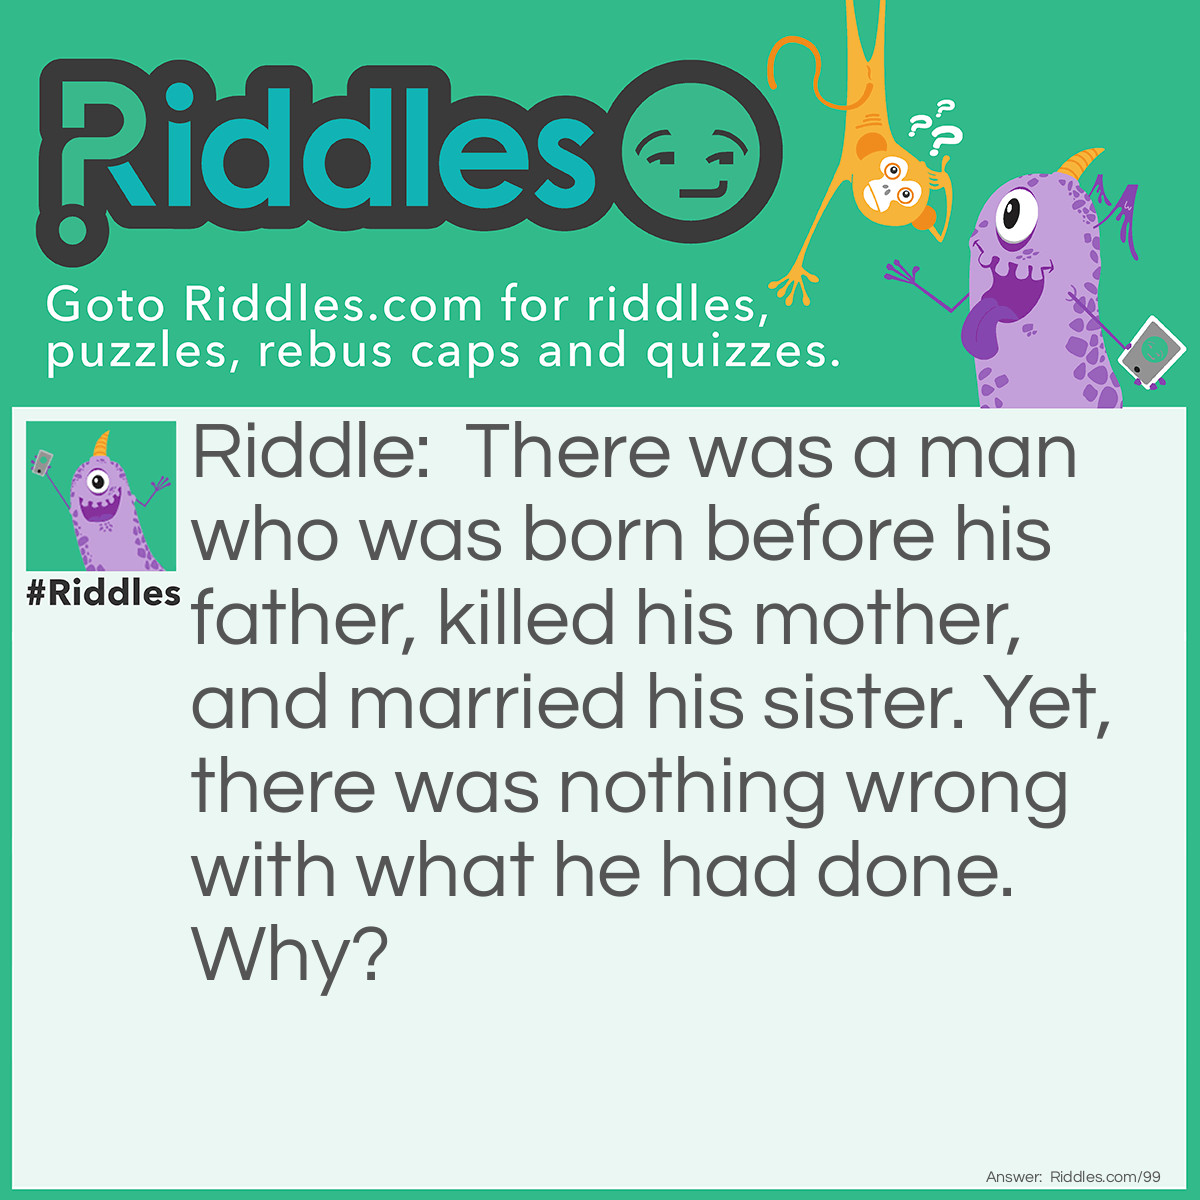 Riddle: There was a man who was born before his father, killed his <a href="/quiz/mothers-day-riddles">mother</a>, and married his sister. Yet, there was nothing wrong with what he had done. Why? Answer: His father was in front of him when he was born, therefore he was born before him. His mother died while giving birth to him. Finally, he grew up to be a minister and married his sister at her ceremony.